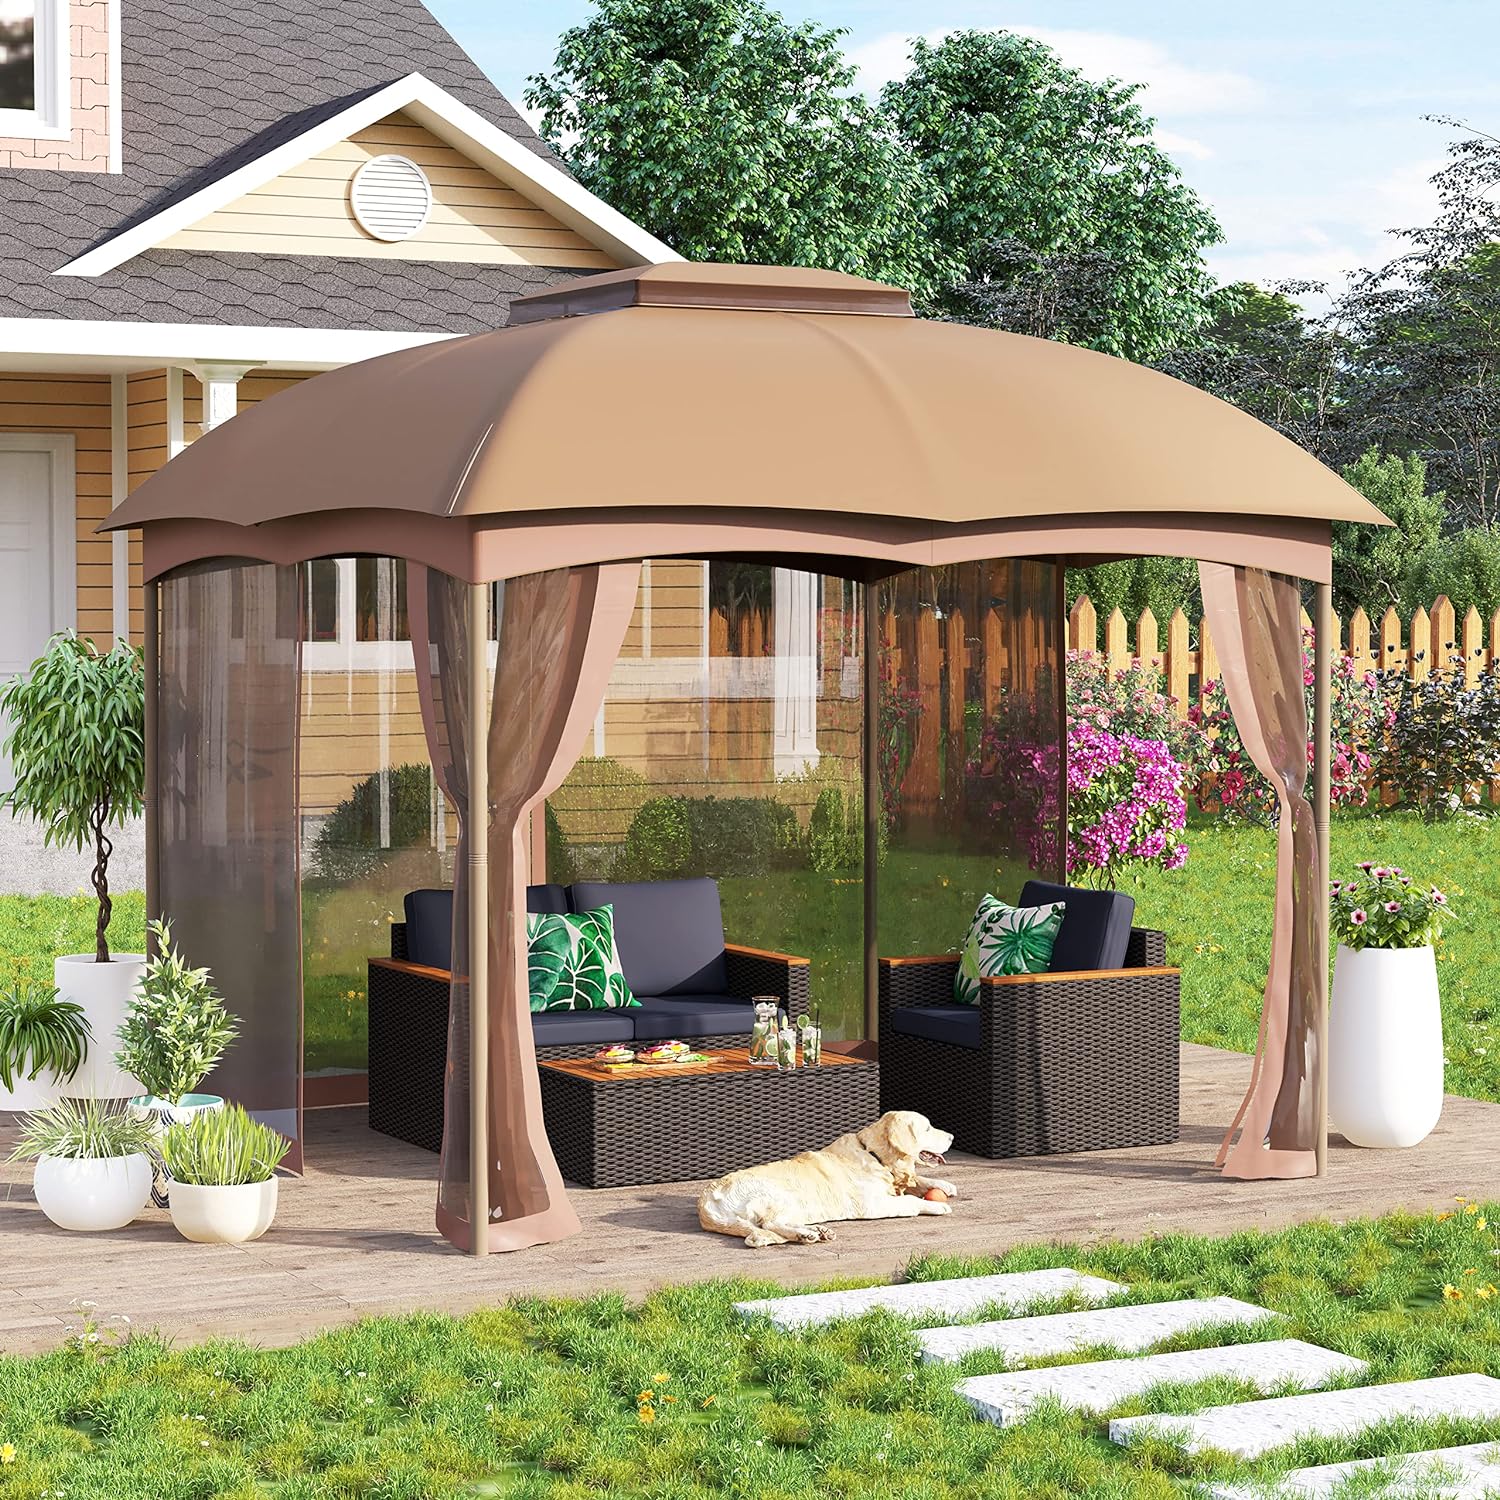 MFSTUDIO 10'x10' Patio Gazebo Tent,Heavy Duty Outdoor Canopy Shelter with Mosquito Netting and Double Roof Tops for Garden Backyard Parties Deck Yard Lawns 